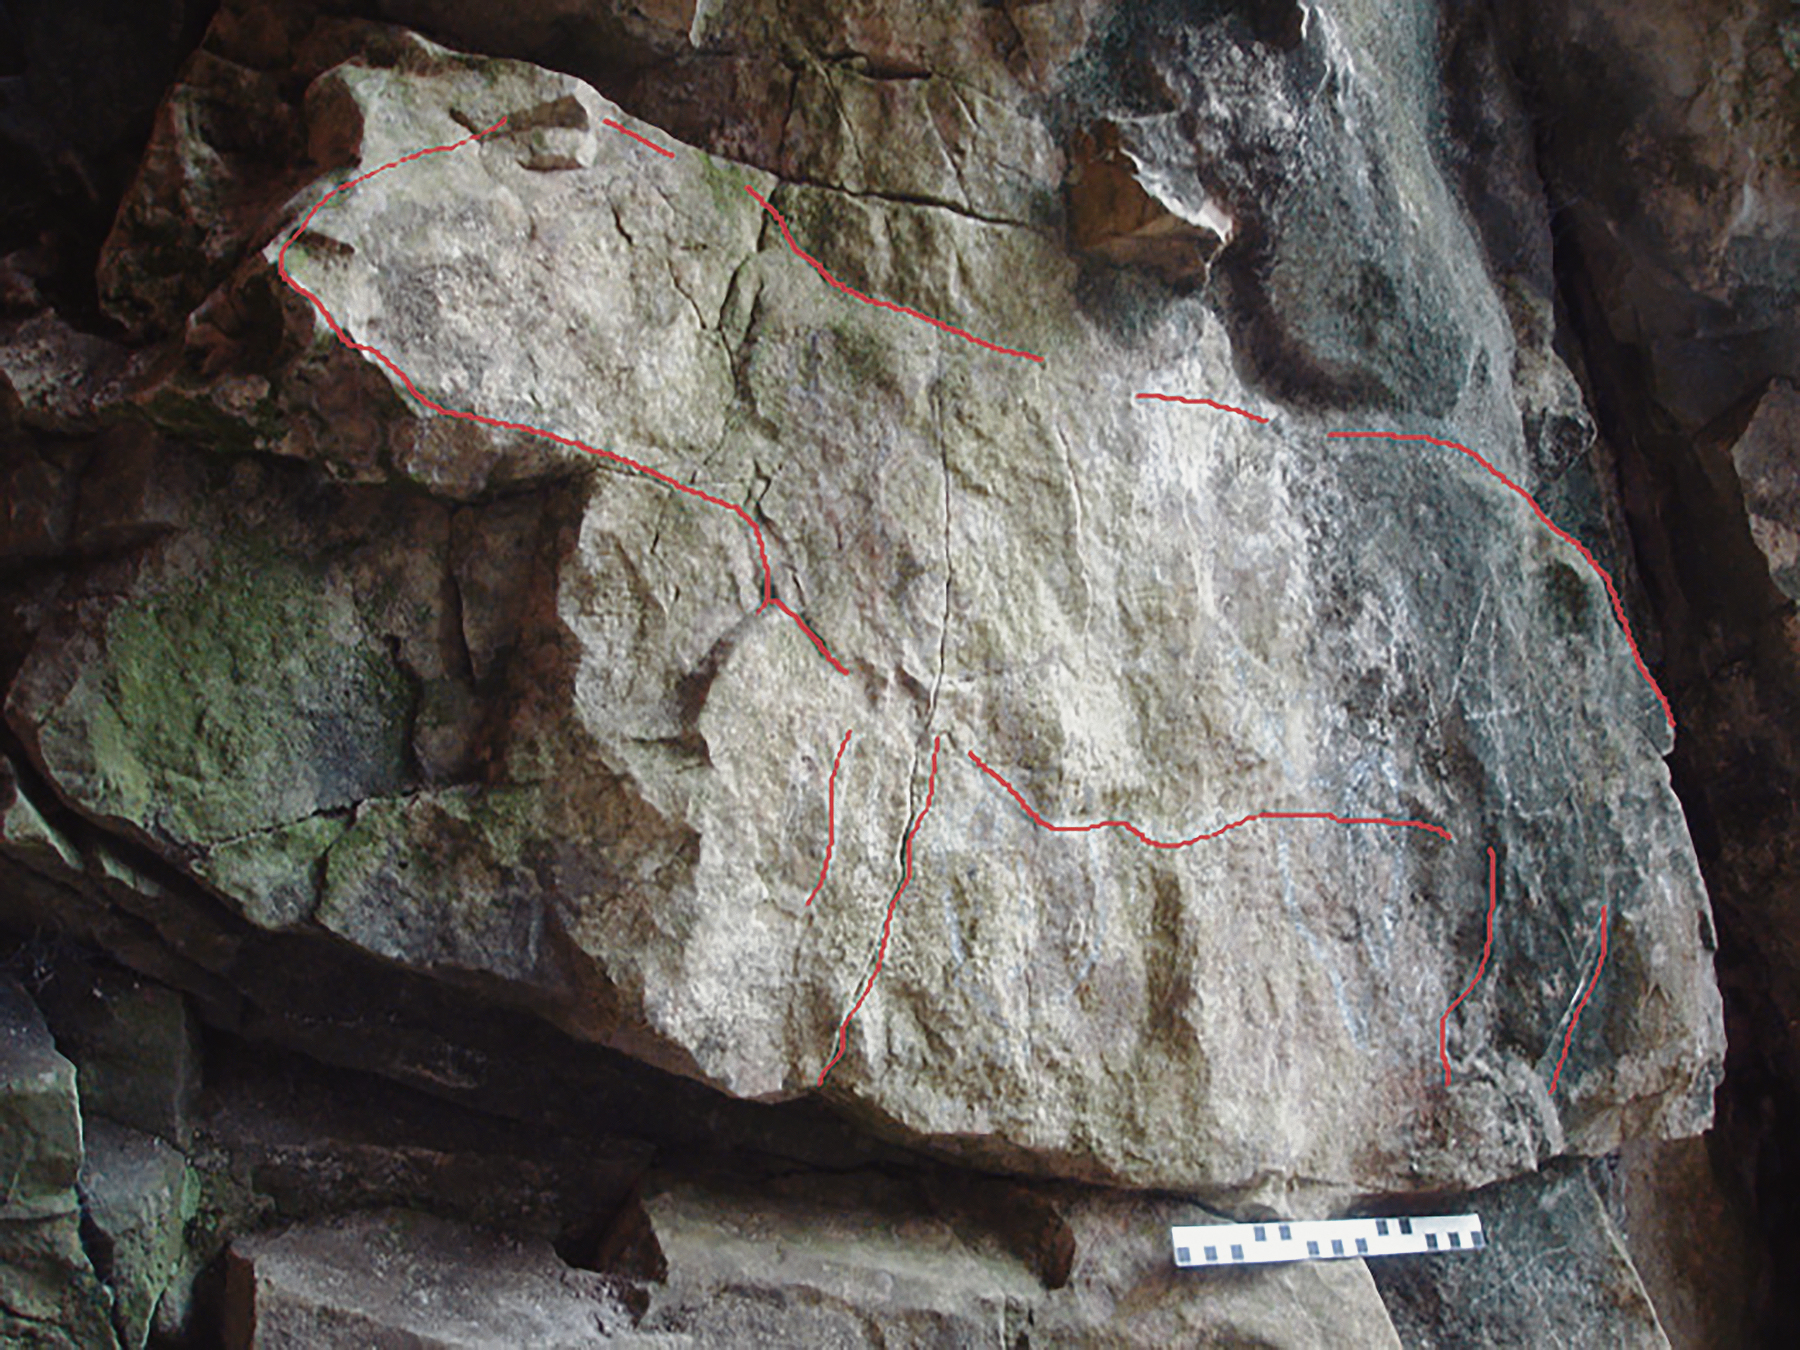 An unlikely bison, Pleistocene in date, located on a vertical panel from Cave 5615, near Symond's Yat in the Wye Valley Gorge, South Herefordshire